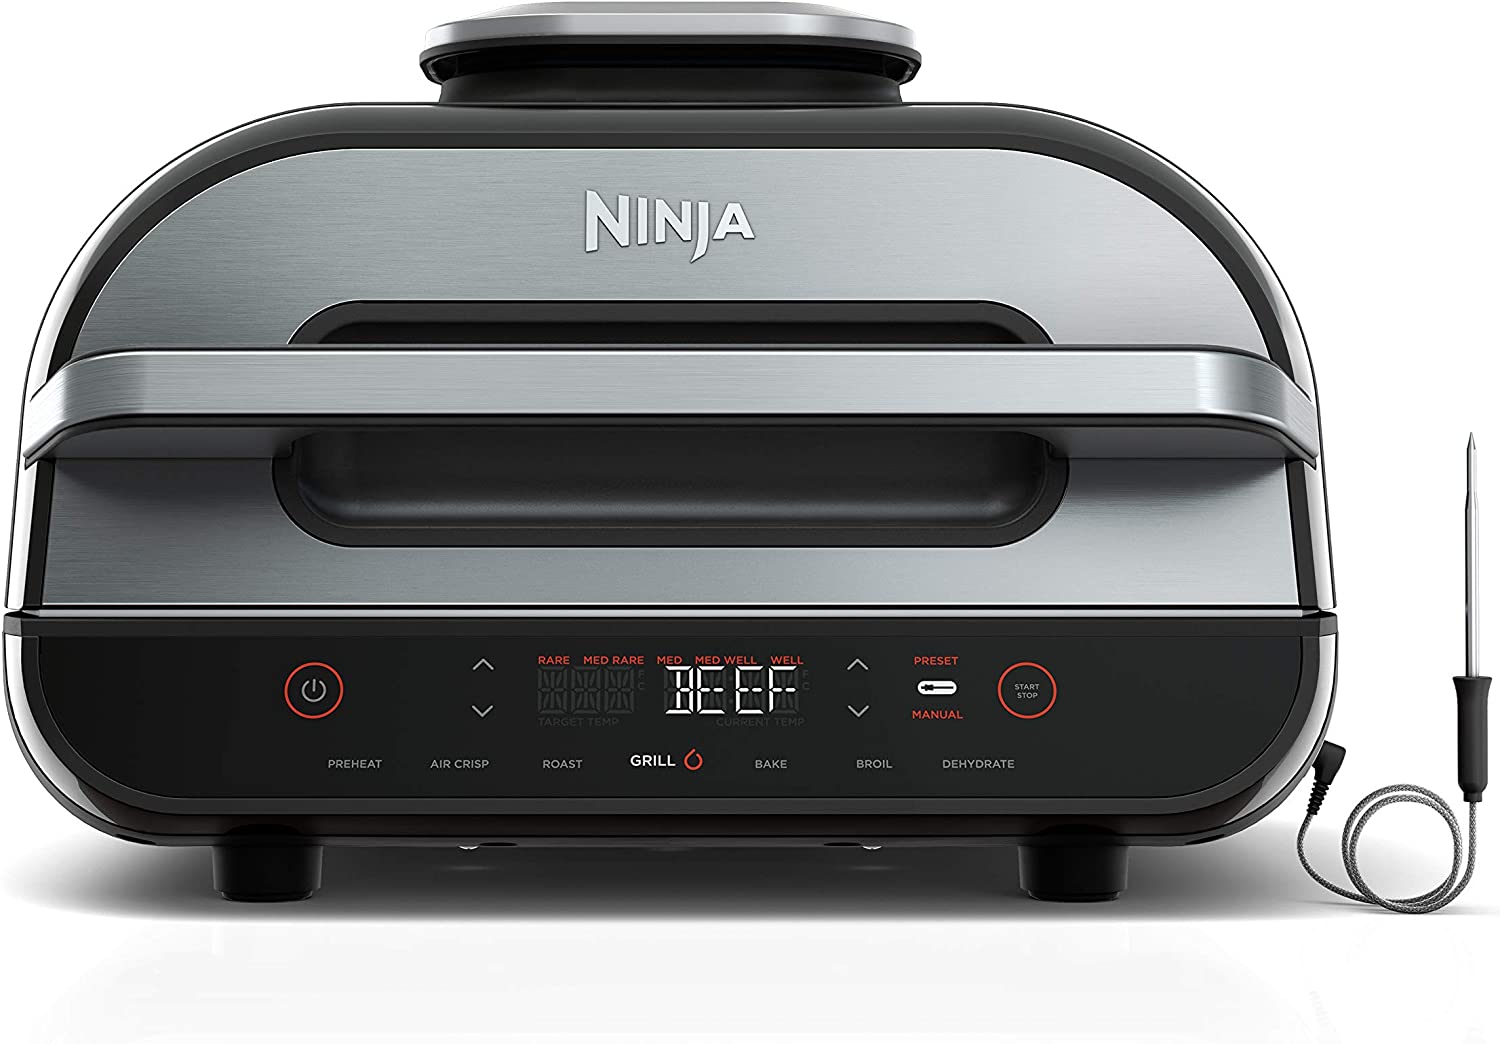 Ninja FG551 Foodi Smart XL 6-in-1 Indoor Grill with Air Fry, Roast, Bake, Broil & Dehydrate, Smart Thermometer, Black Silver